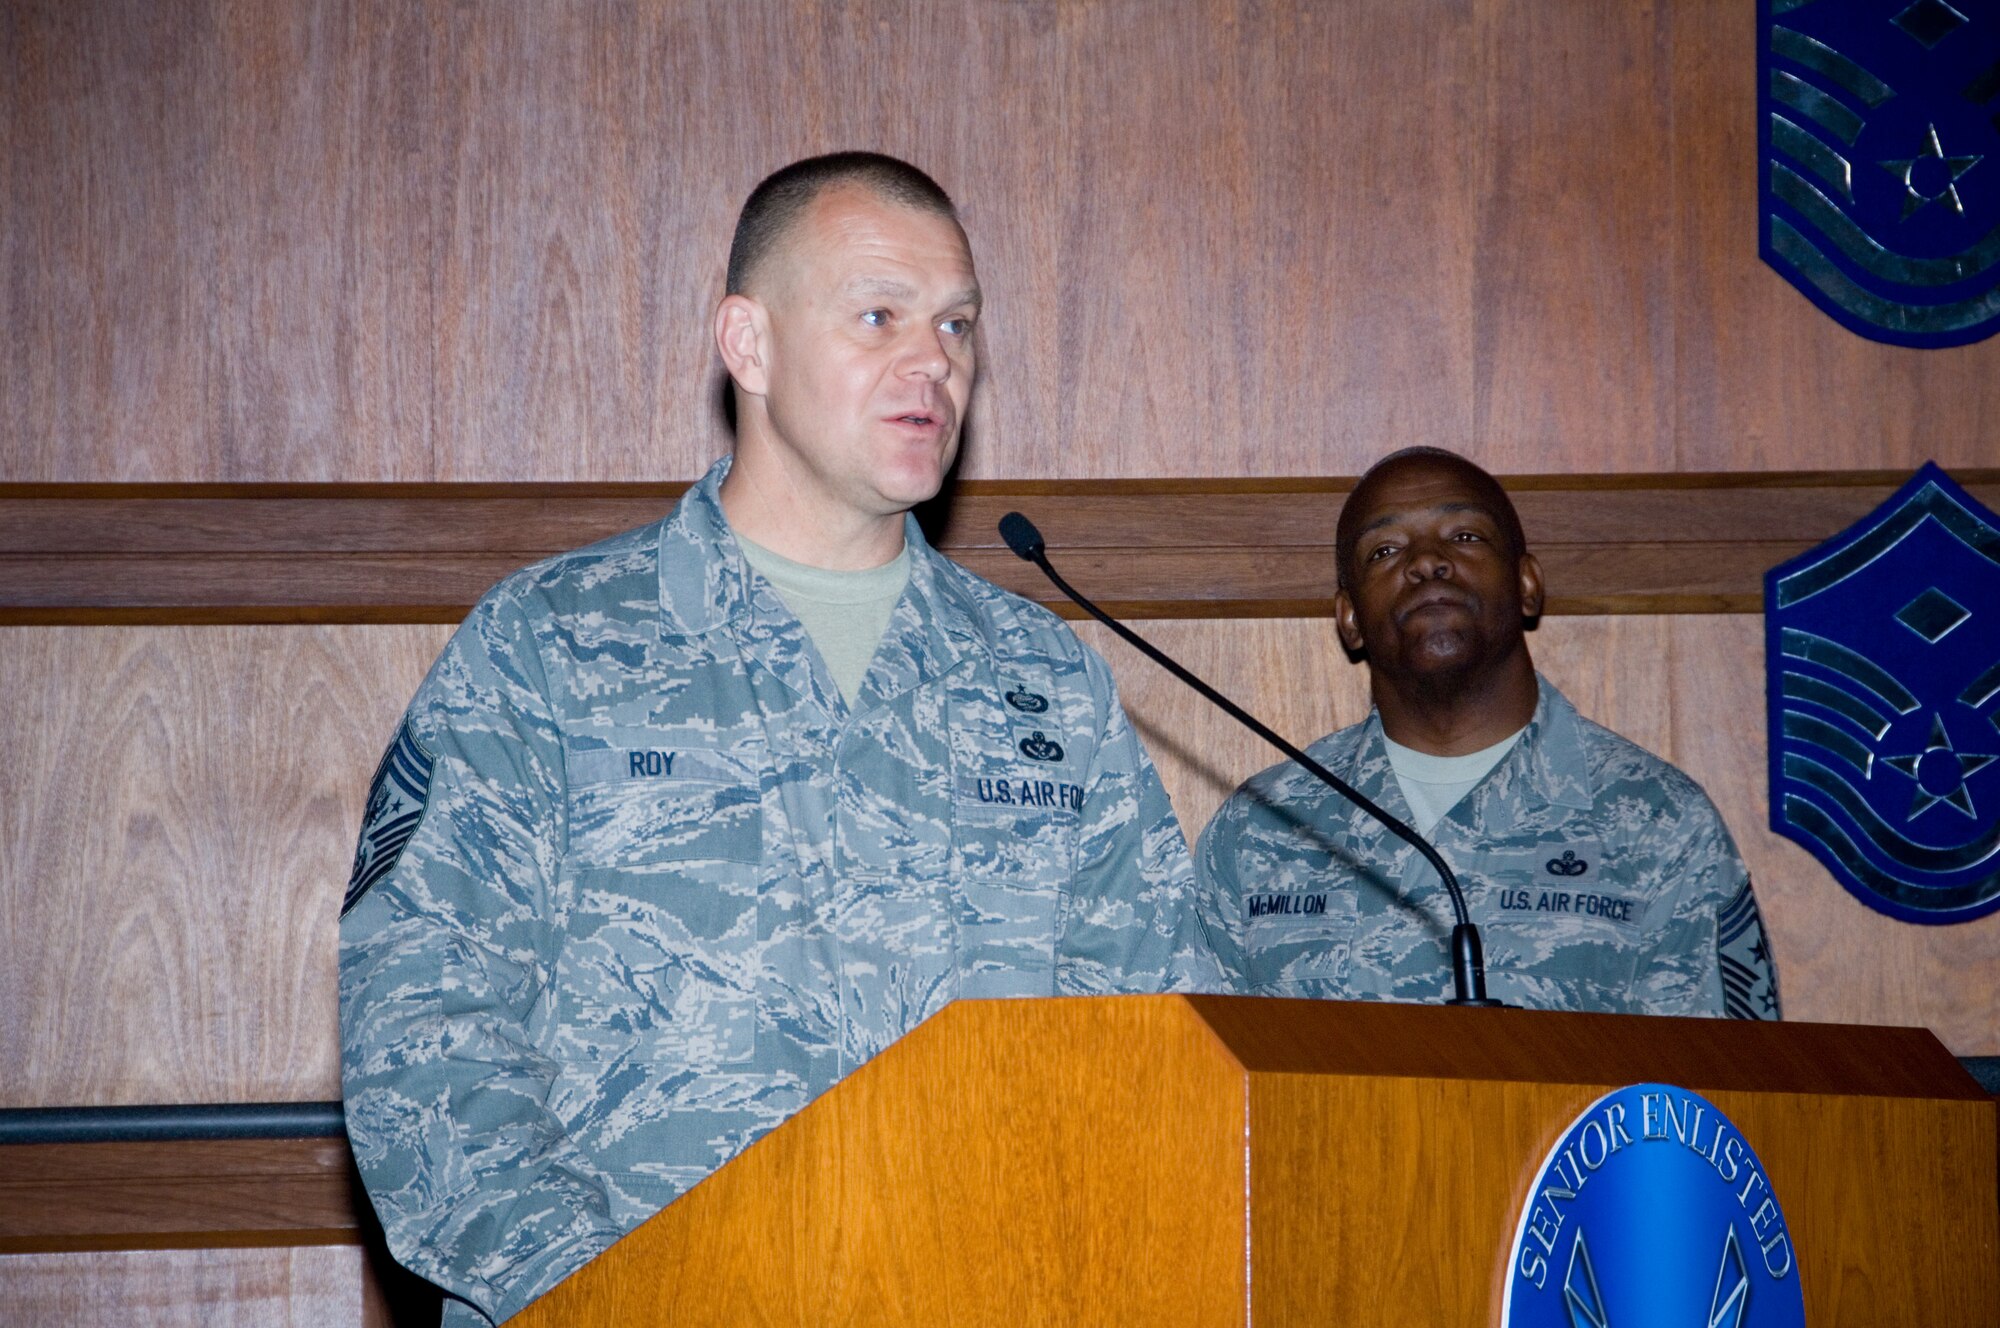 Chief Master Sergeant of the Air Force, James A. Roy speaks to the 370 senior enlisted Air Force, joint and partner nation representatives during the Senior Enlisted Leader Summit, while Chief Master Sgt. Brye McMillon, Air University Command Chief, listens. (Air Force photo/Melanie Rodgers Cox).